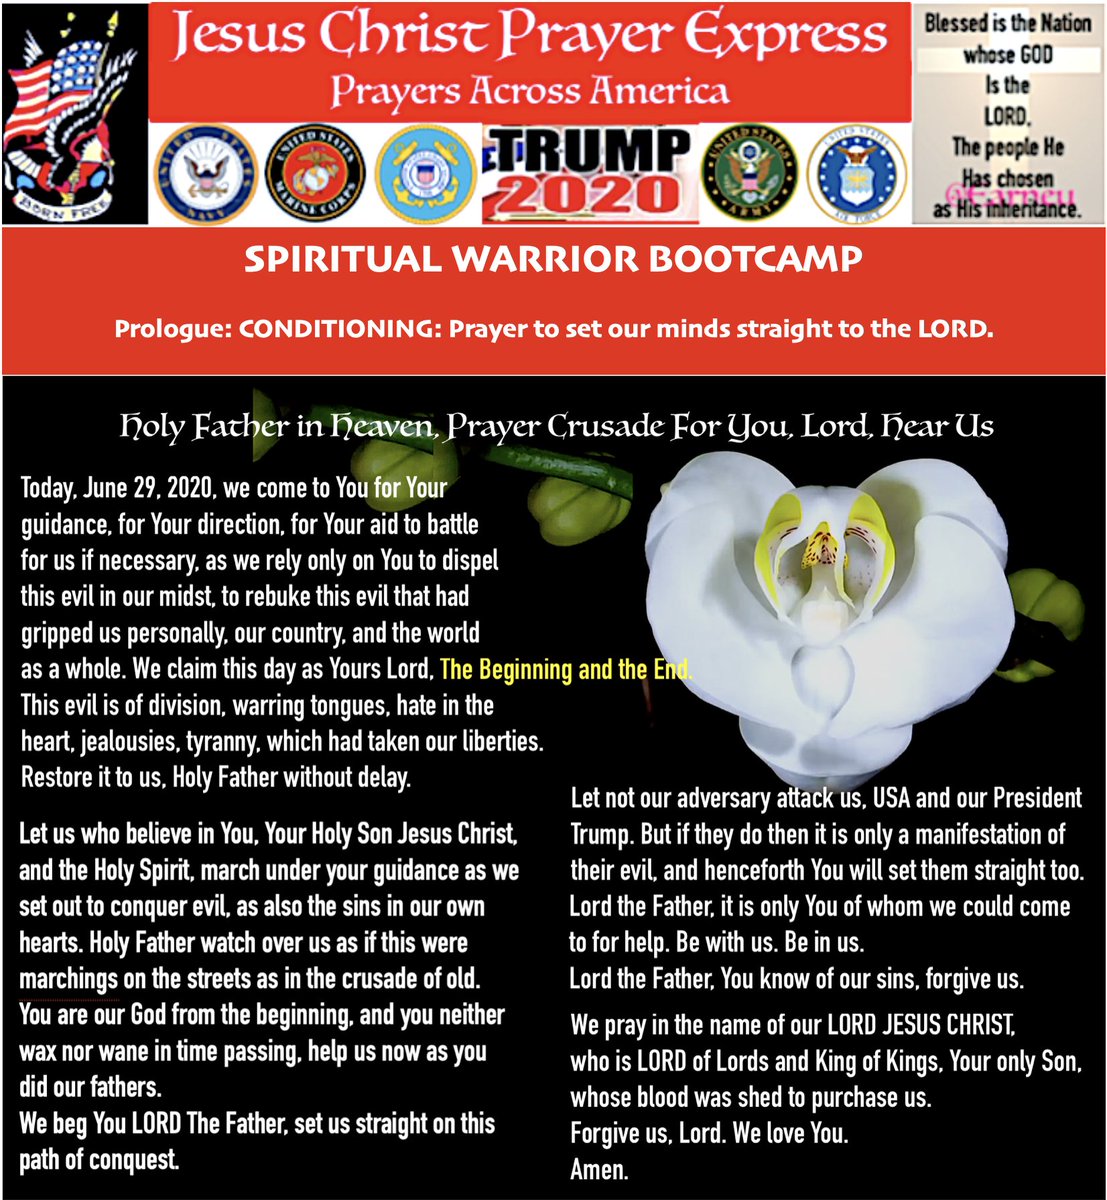 Jesus Christ Prayer Express  #JCPESPIRITUAL WARFARE EDITIONPrayer Warriors On DeckThis is a Crusade- Prayer Angels GEAR UP to move to higher realms called SPIRITUAL WARFAREBefore you say "Yes" know what it REQUIRES:YOUR FULL TOTALSURRENDER TO GOD.No 99.999%